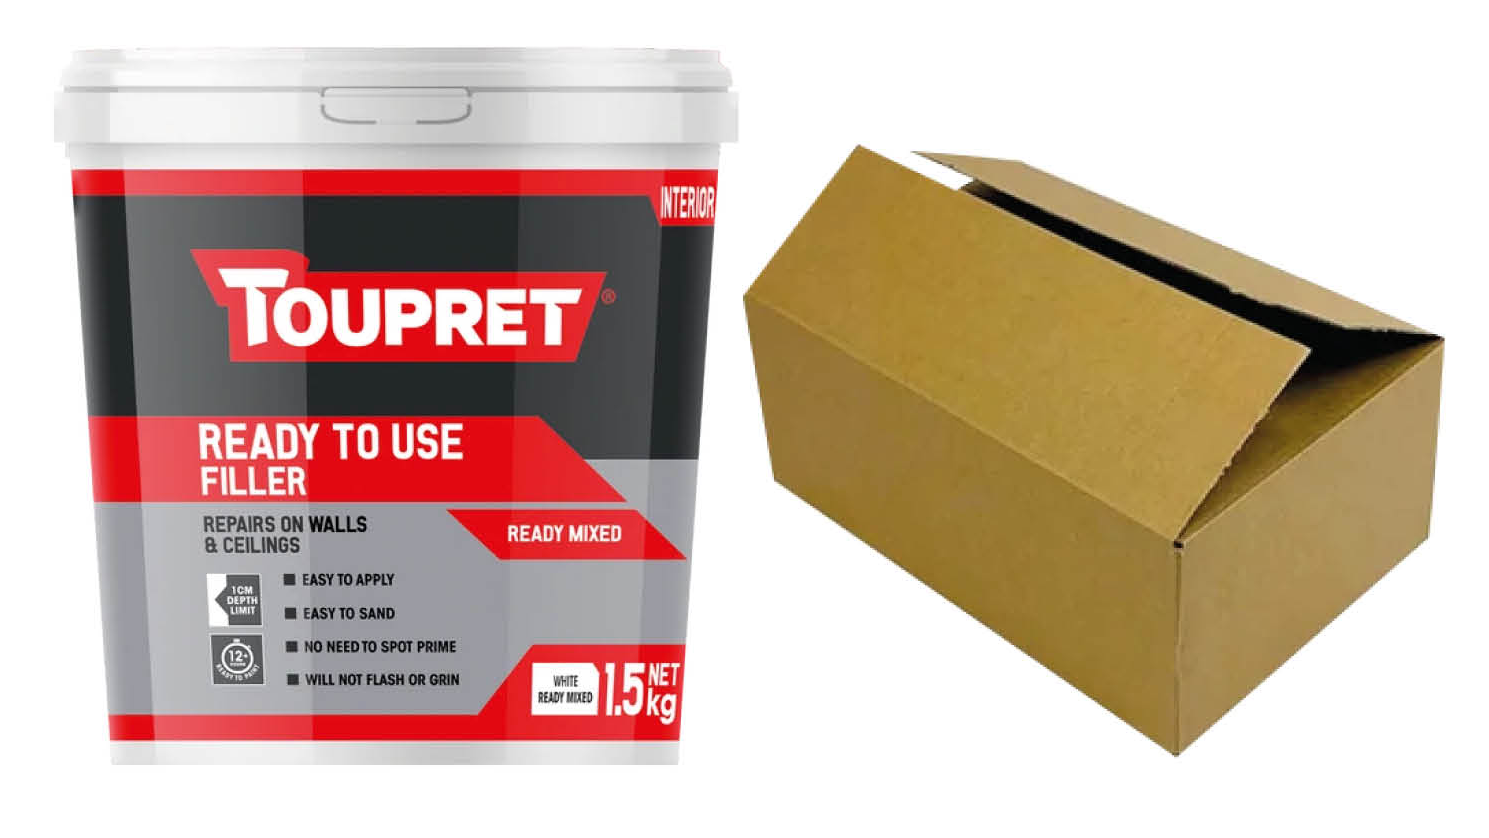 Toupret Ready to Use Filler (Ready Mixed) 1.5kg (Box of 6)